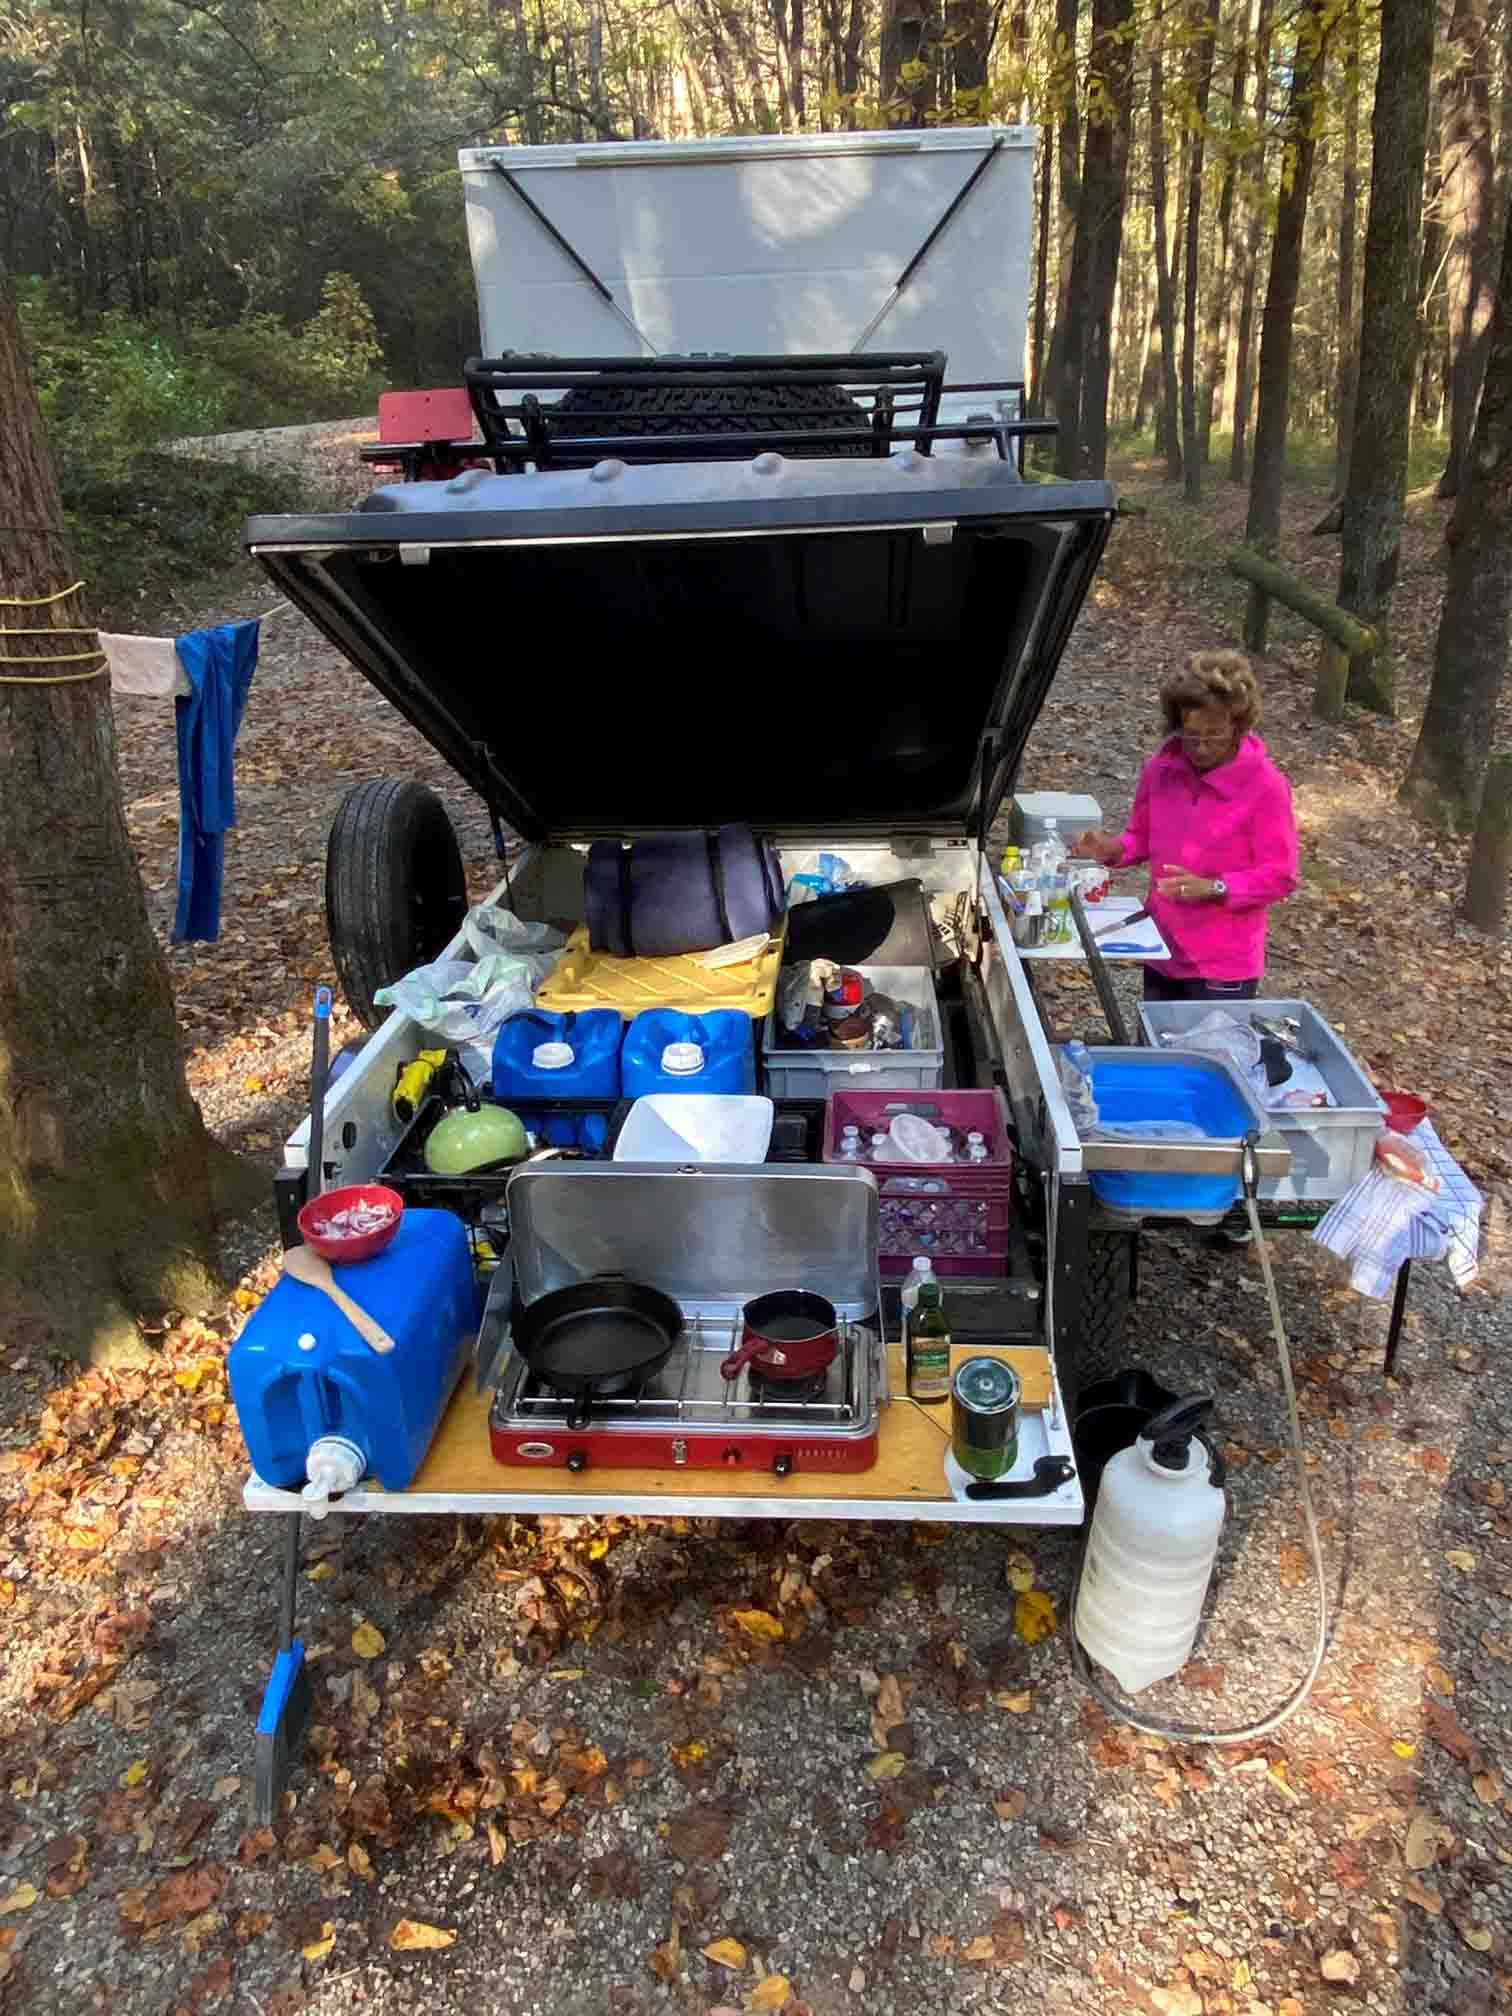 space trailer open while camping